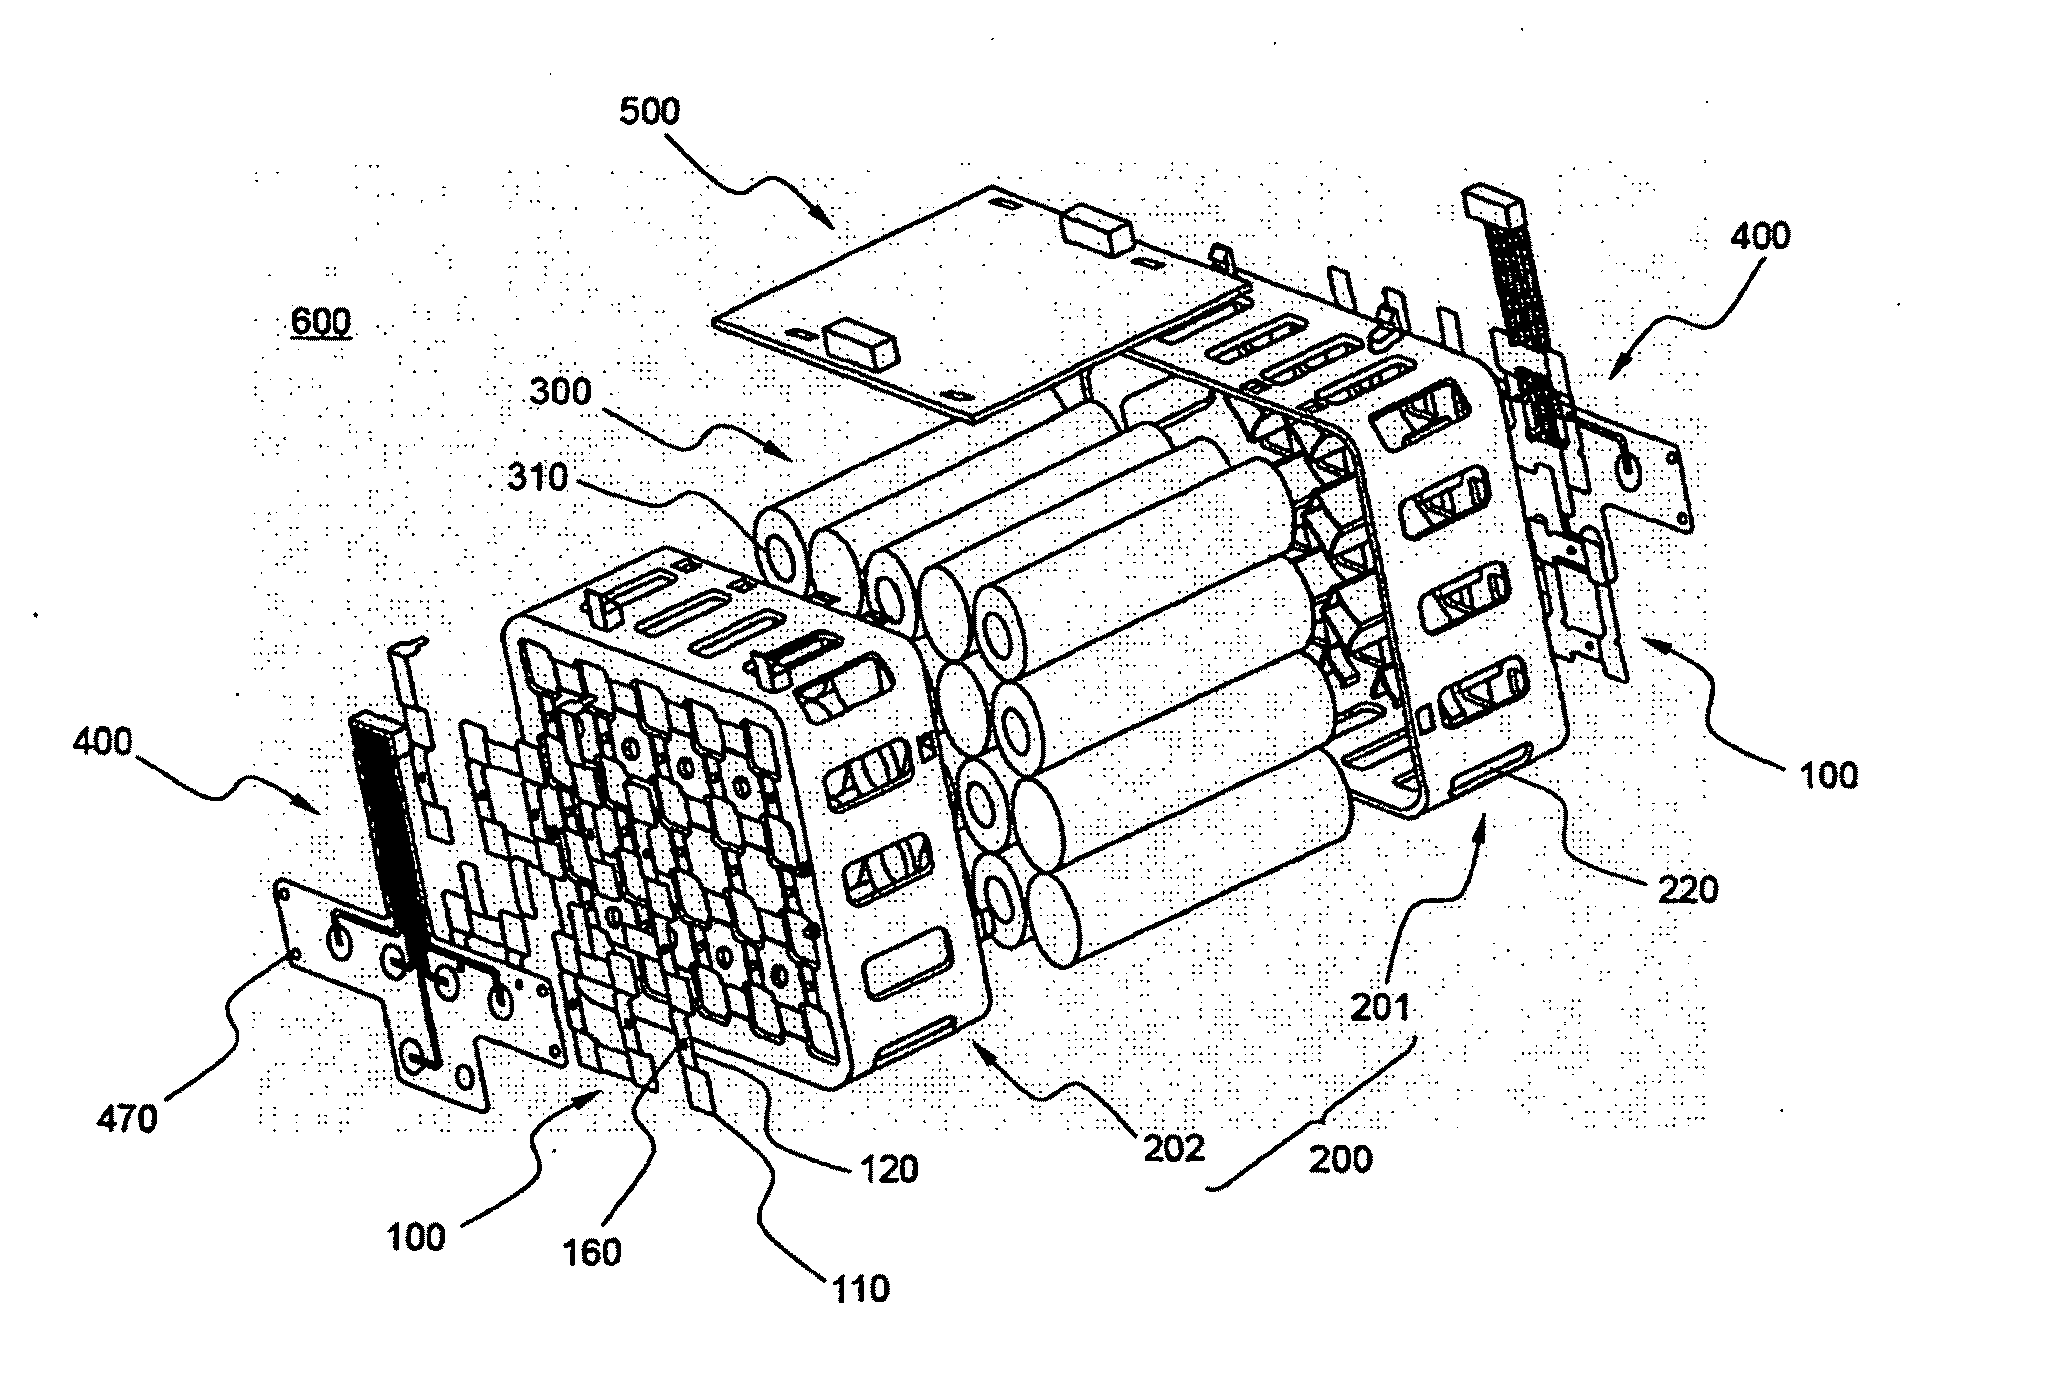 Connection-member for electrical connection of battery cells